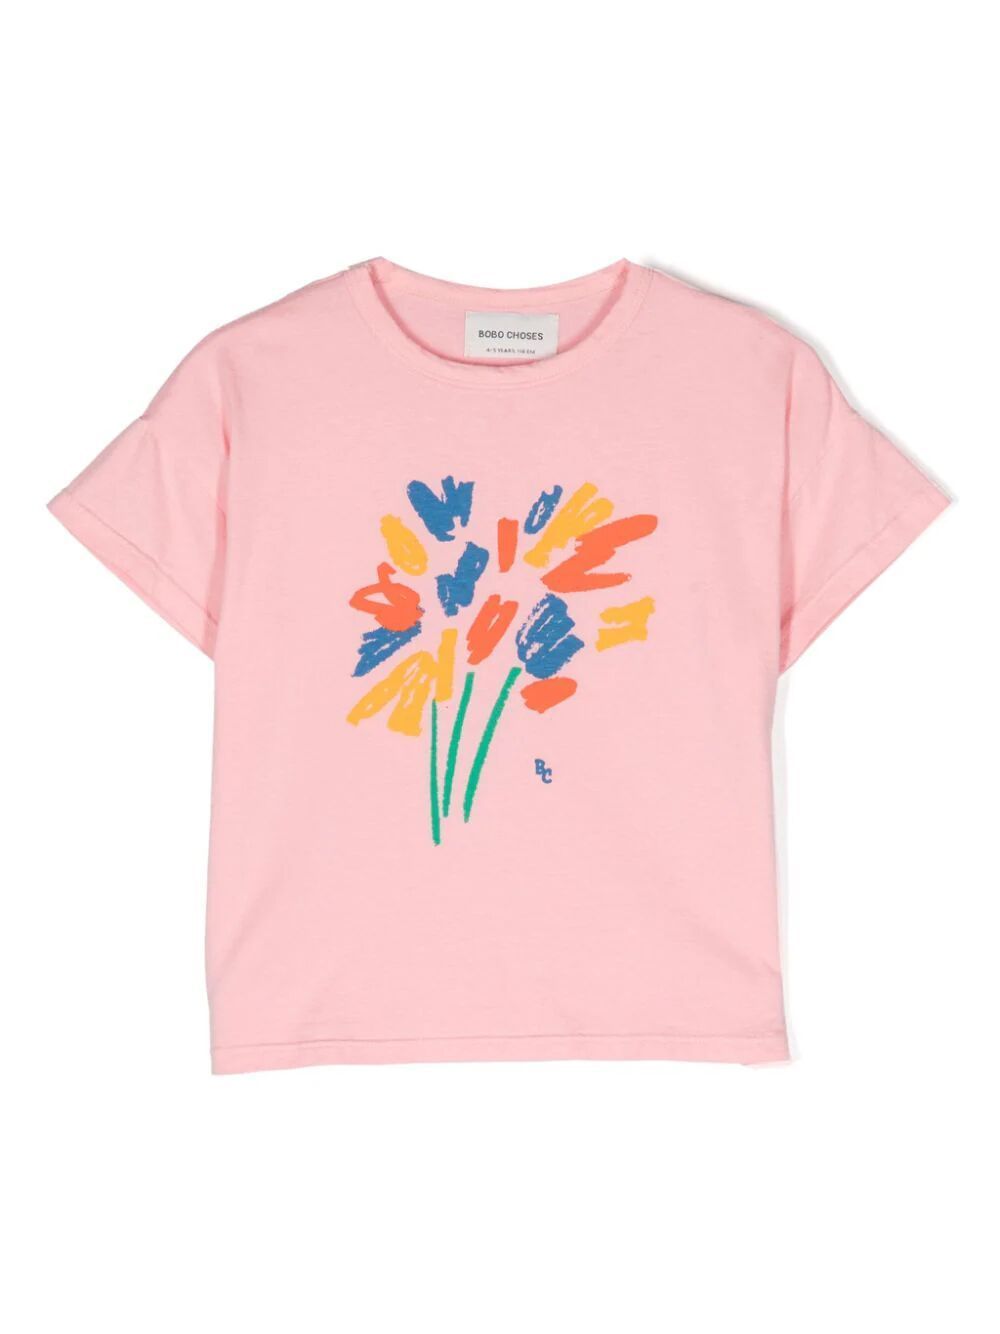 Bobo Choses Fireworks T In Pink & Purple